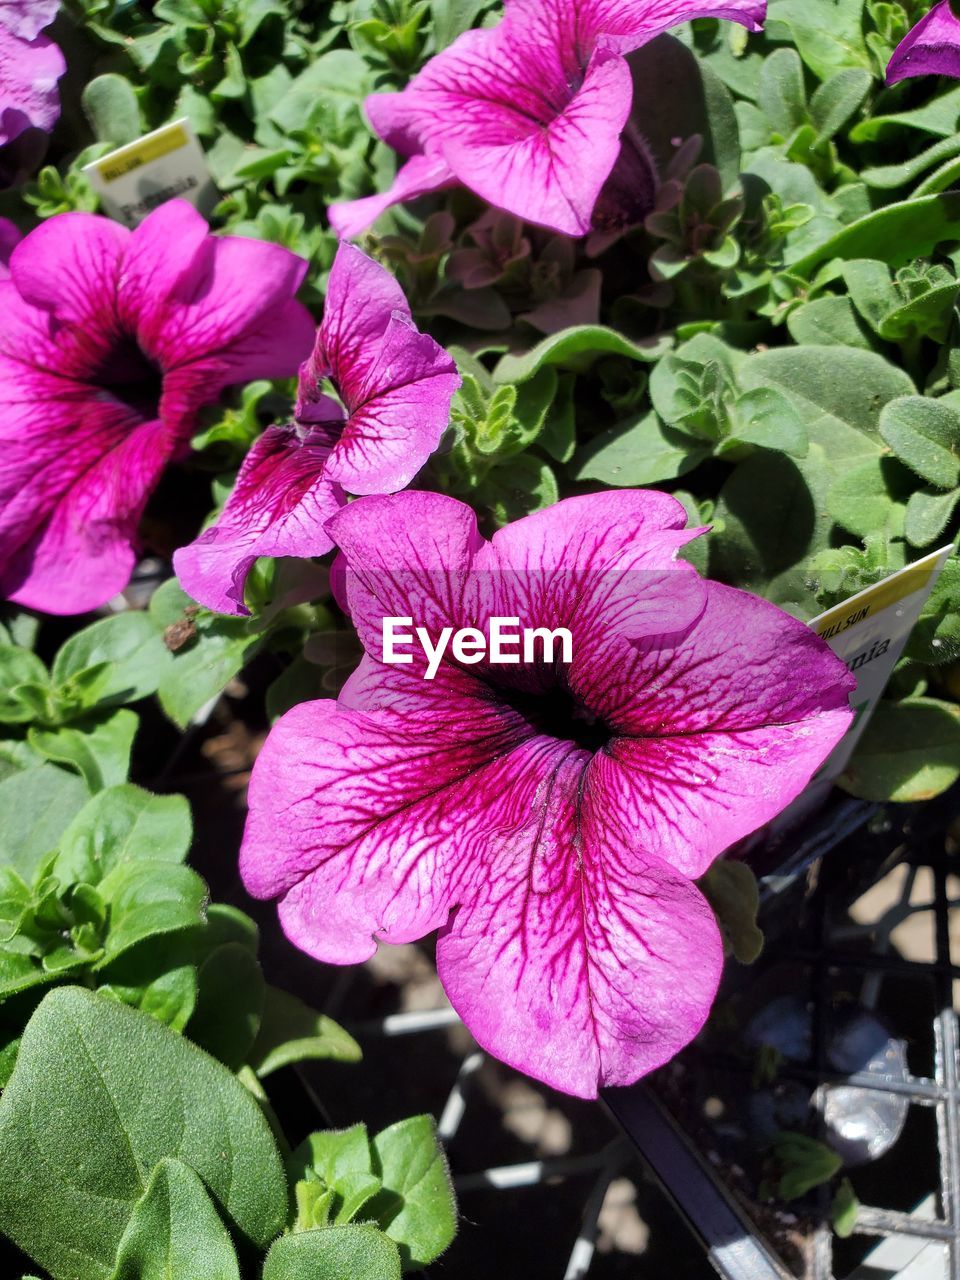 flower, plant, flowering plant, freshness, growth, beauty in nature, petal, fragility, inflorescence, flower head, pink, close-up, plant part, leaf, nature, no people, petunia, day, purple, outdoors, pollen, springtime, botany, green, hibiscus, blossom, high angle view